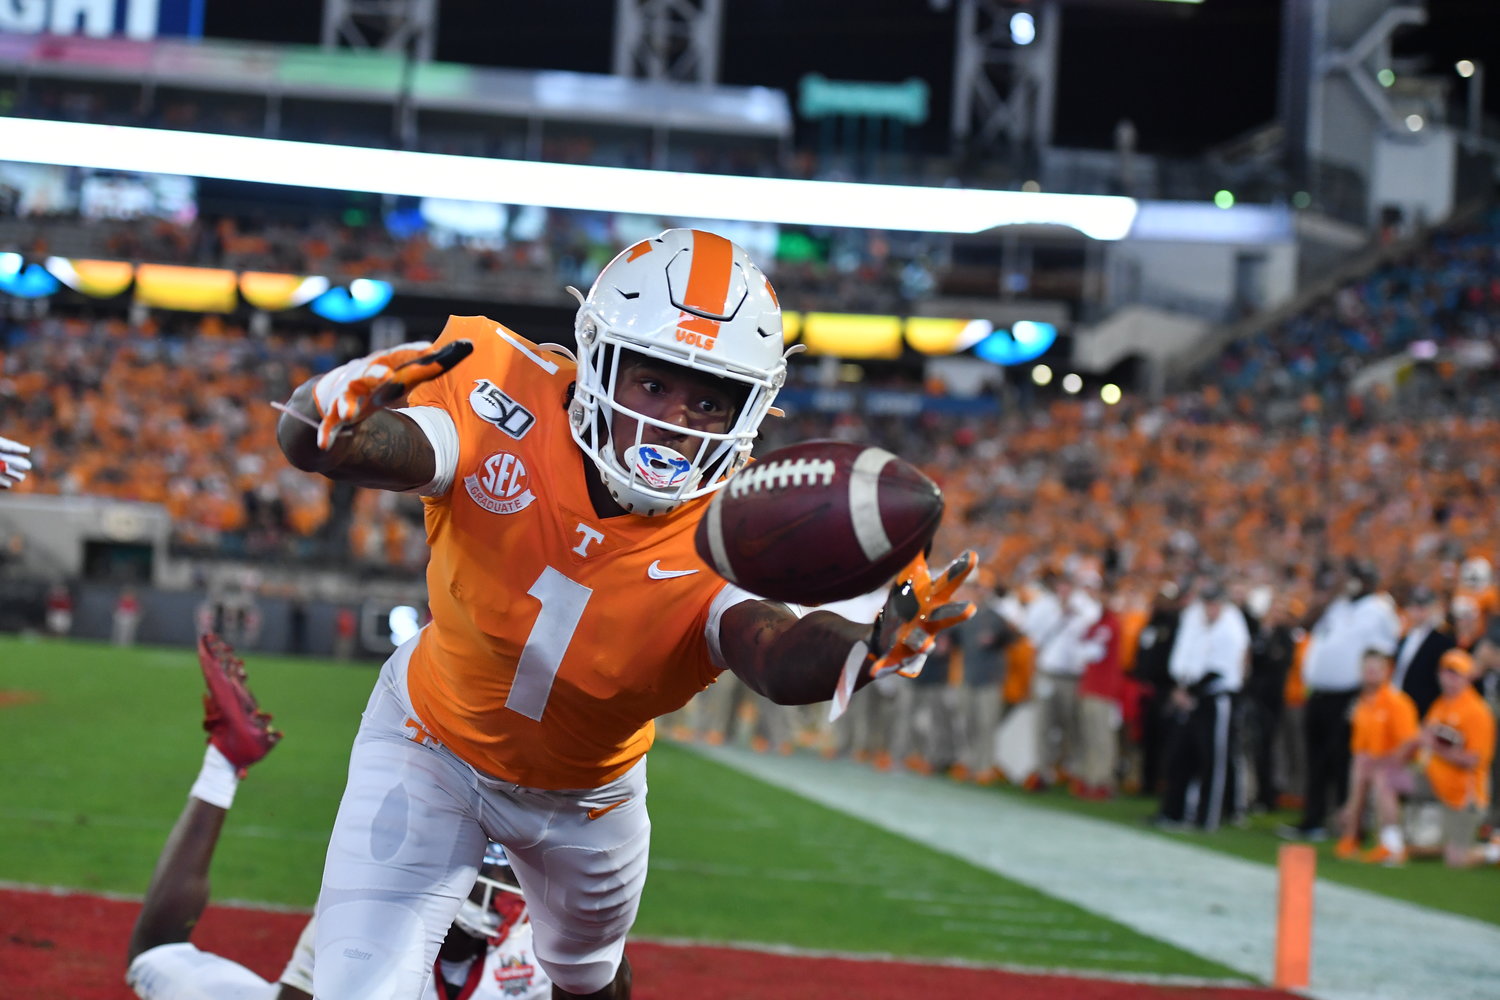 Tennessee Volunteers wide receiver Marquez Callaway (1) reaches for a pass in the end zone but can't quite get it during the first half of the Gator Bowl NCAA football game against the Indiana Hoosiers Thursday, January 2, 2020, at TIAA Bank Field in Jacksonville, Fla.